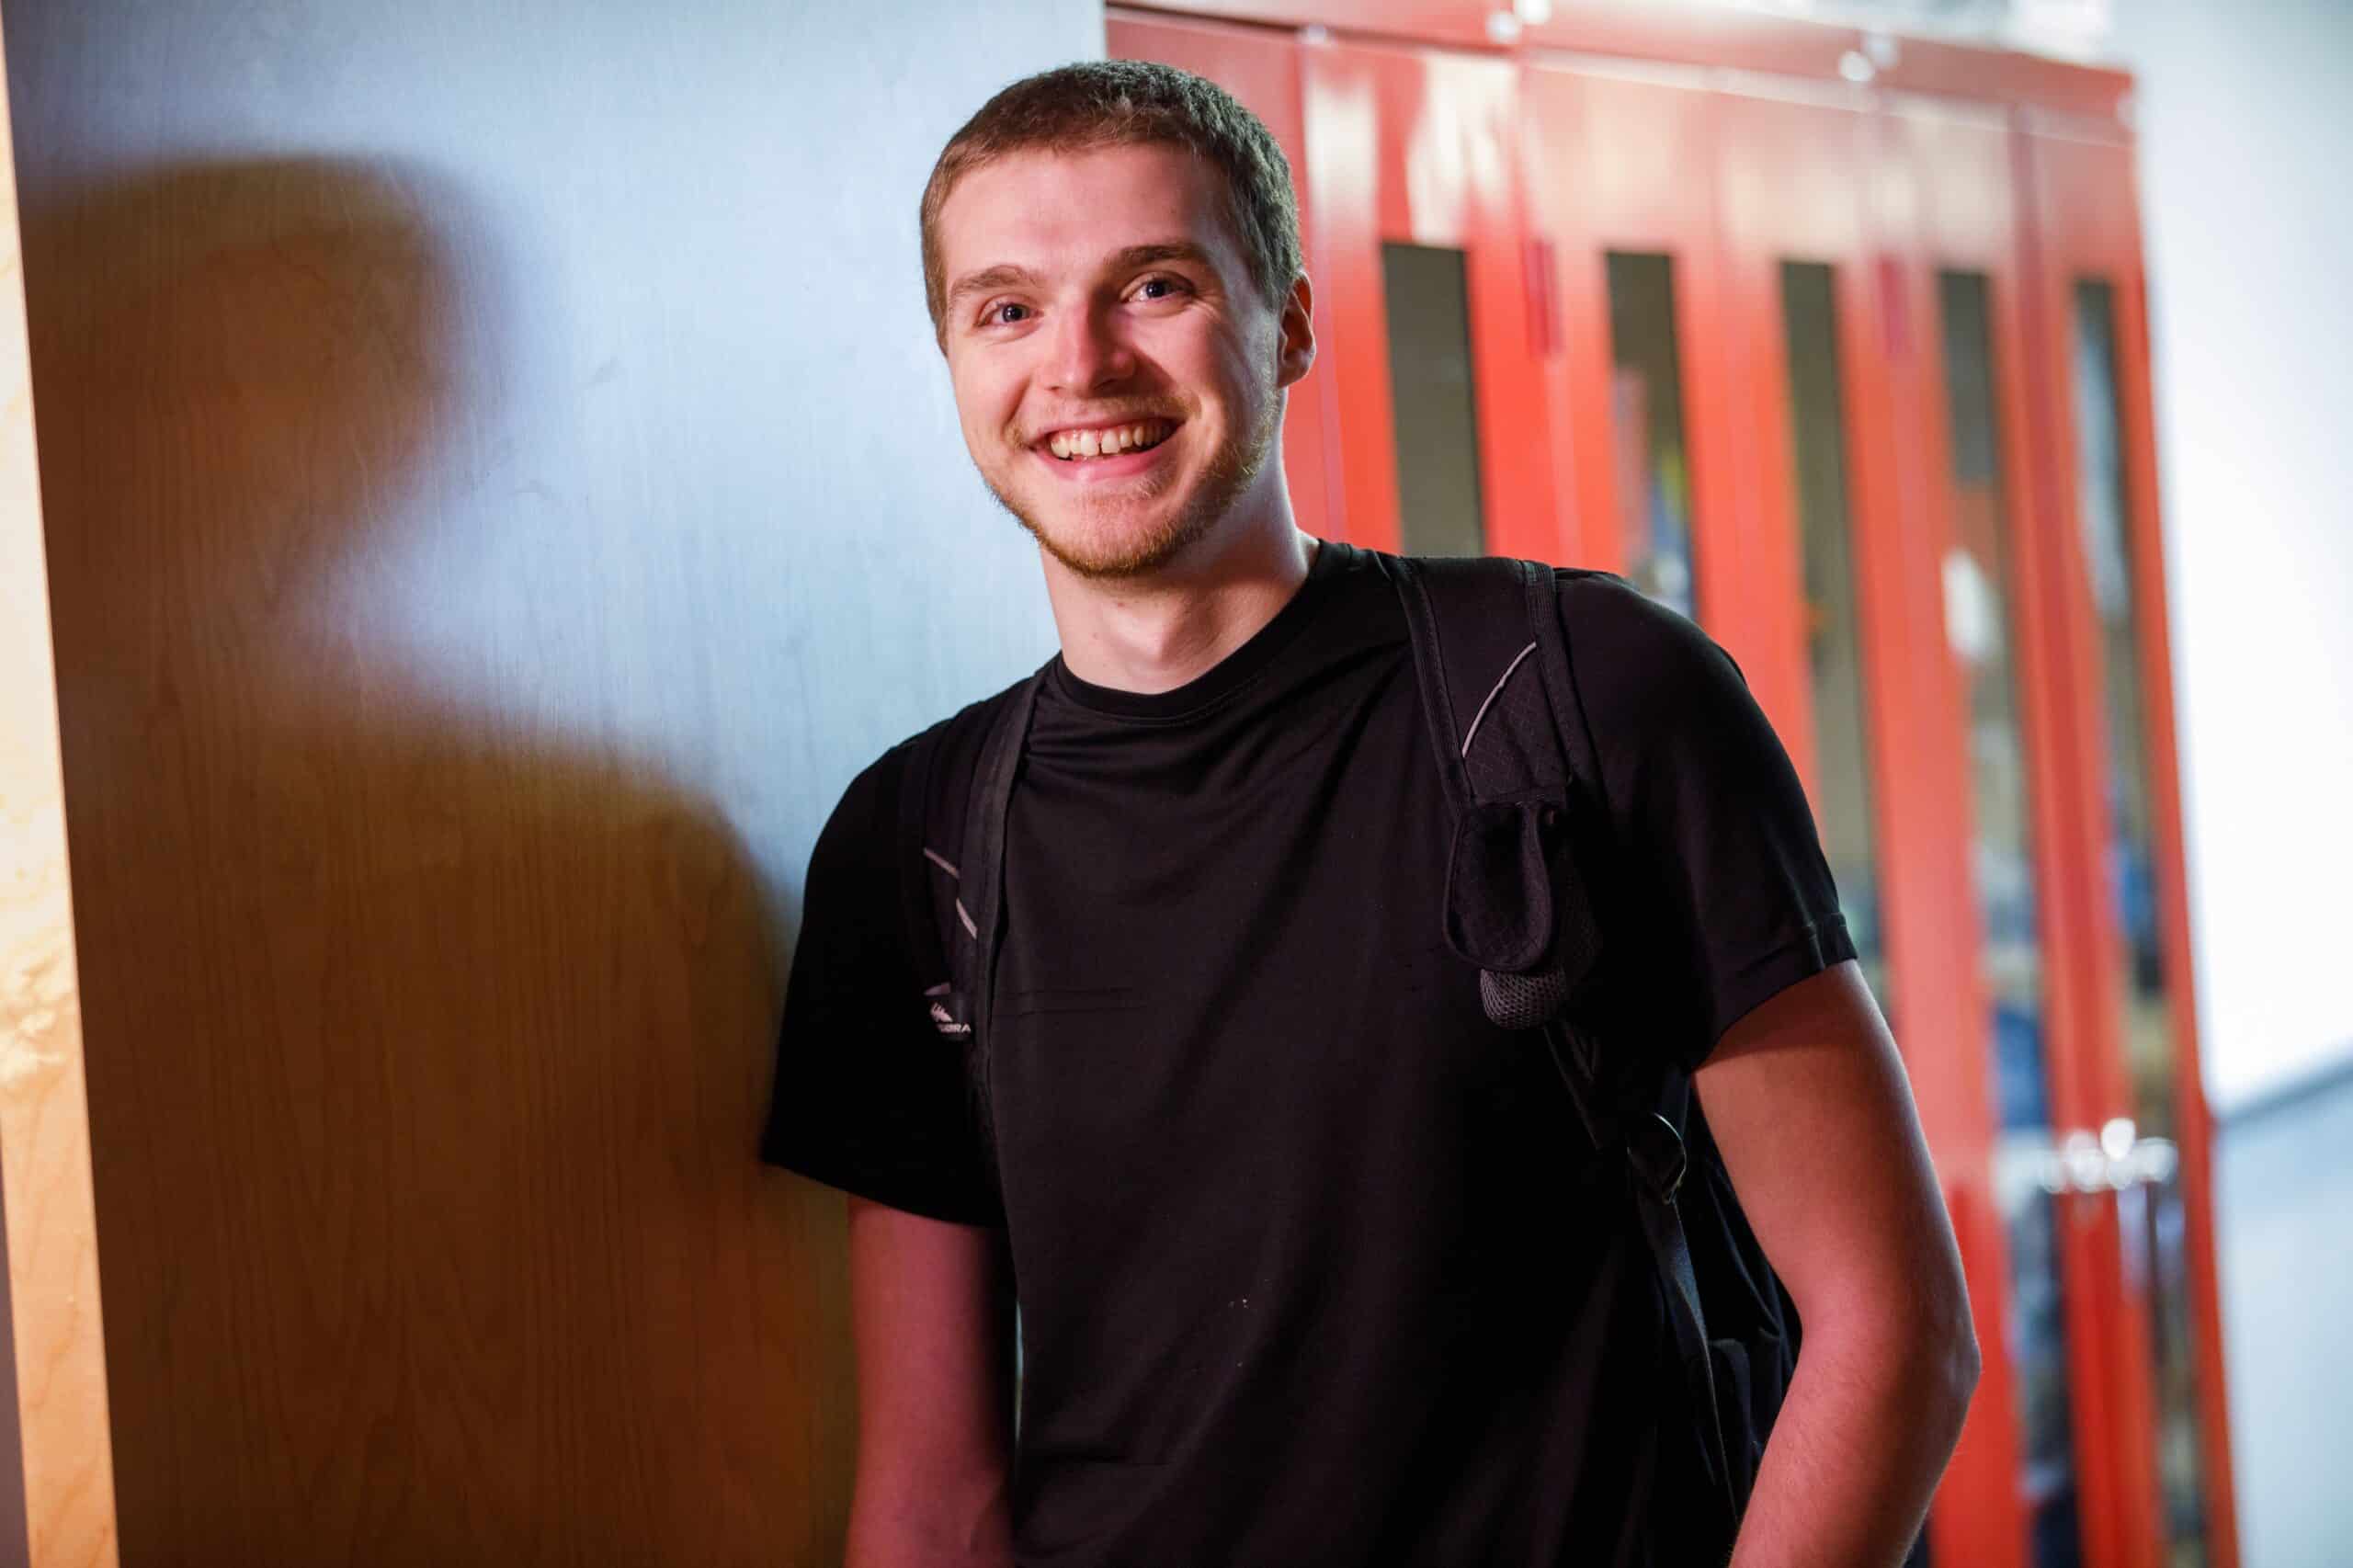 A young man with short hair in a black t-shirt smiles at the camera.